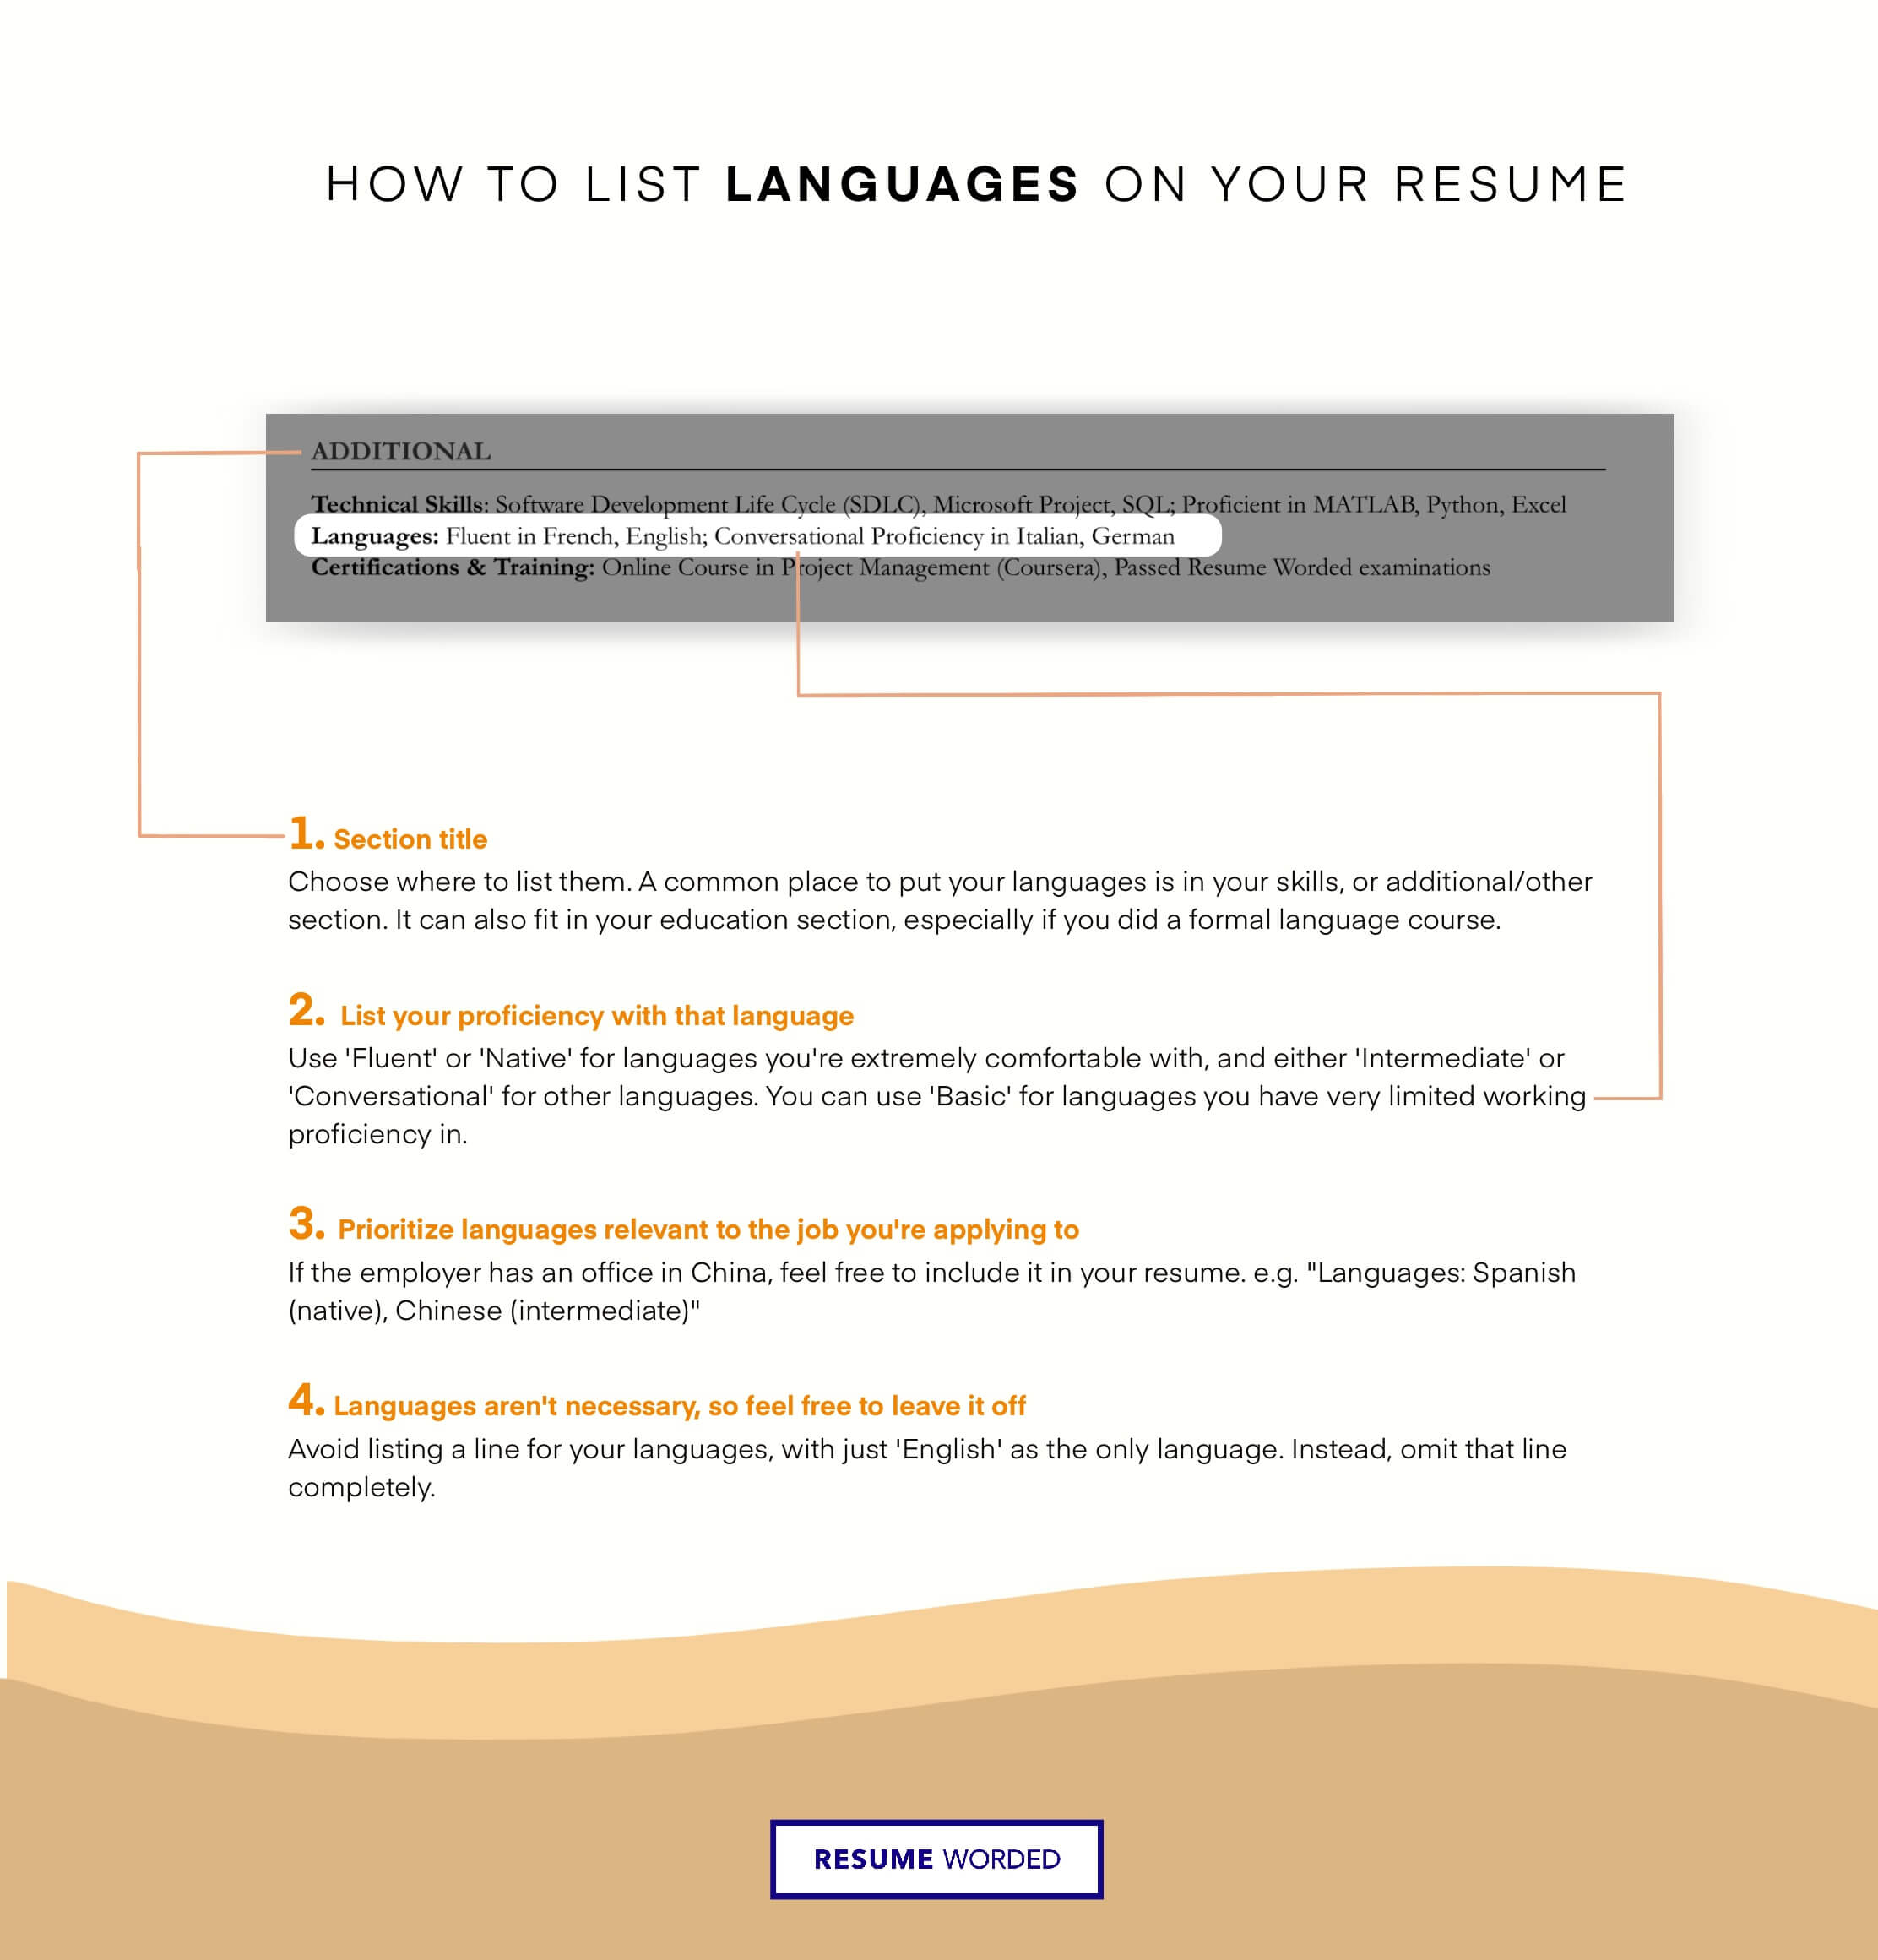 Show prowess in coding languages - Entry Level Software Developer CV